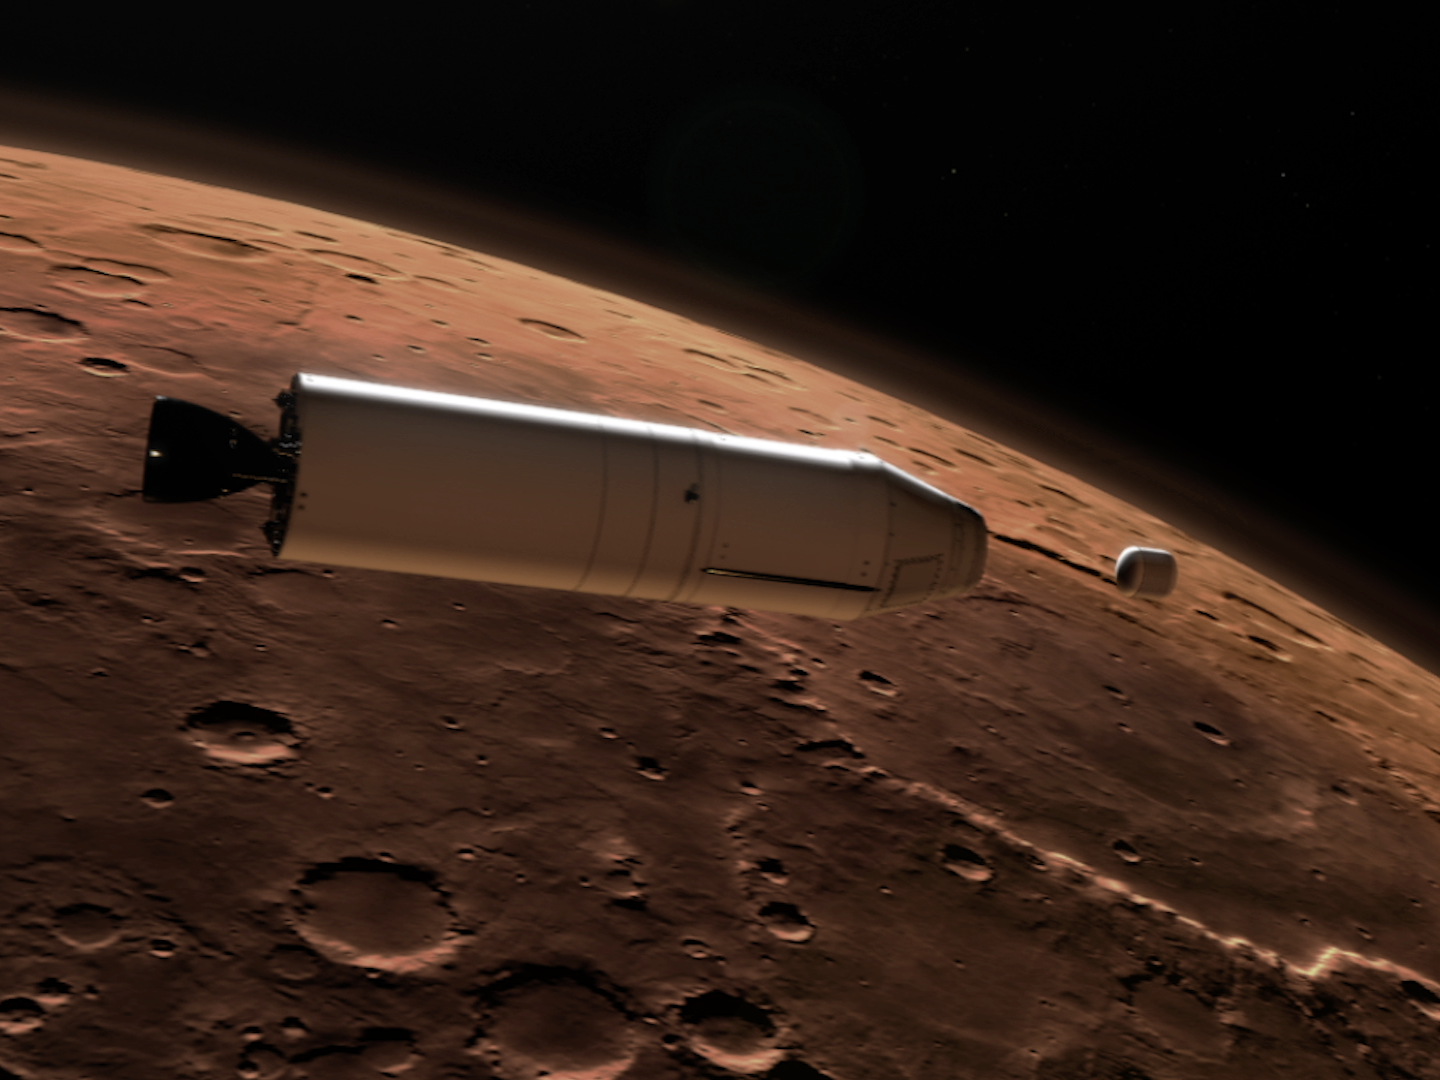 illustration of mars sample return mission shows mini rocket releasing small container into mars orbit